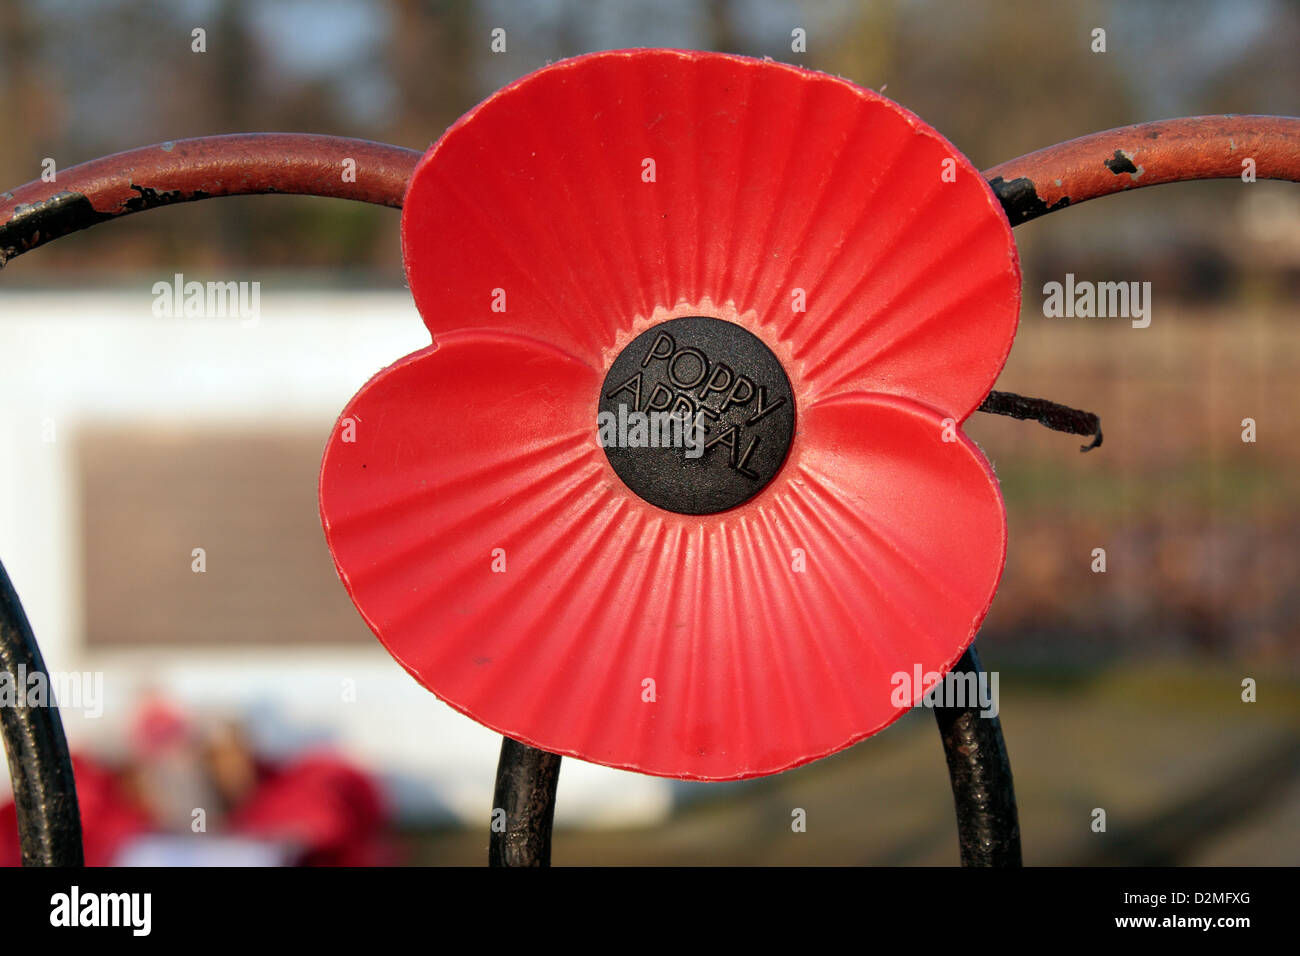 A large poppy on the United States Army Air Forces WWII memorial in Bushy Park, West London, UK. Stock Photo